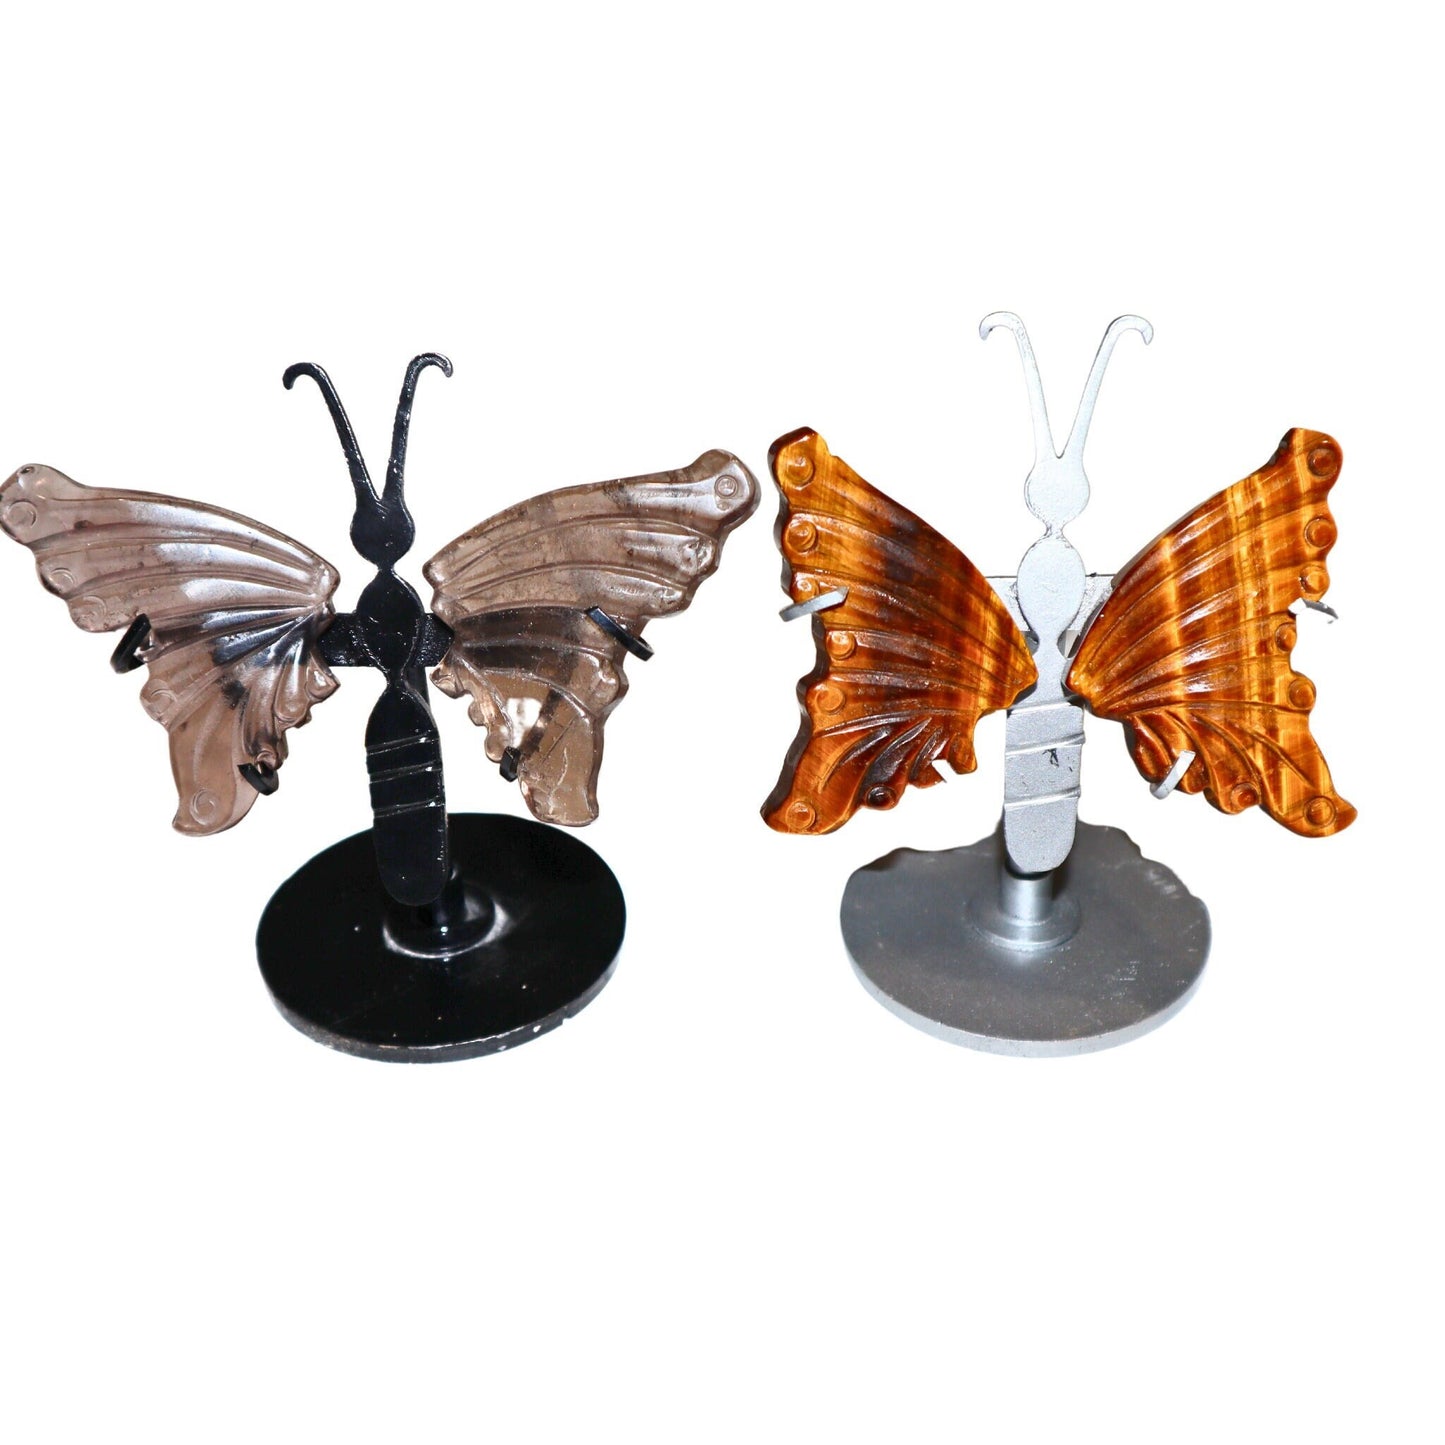 Crystal Butterfly Wings with Stand, Smoky Quartz Wings, Tigers Eye Wings, Natural Crystal Carving, Butterfly Wings